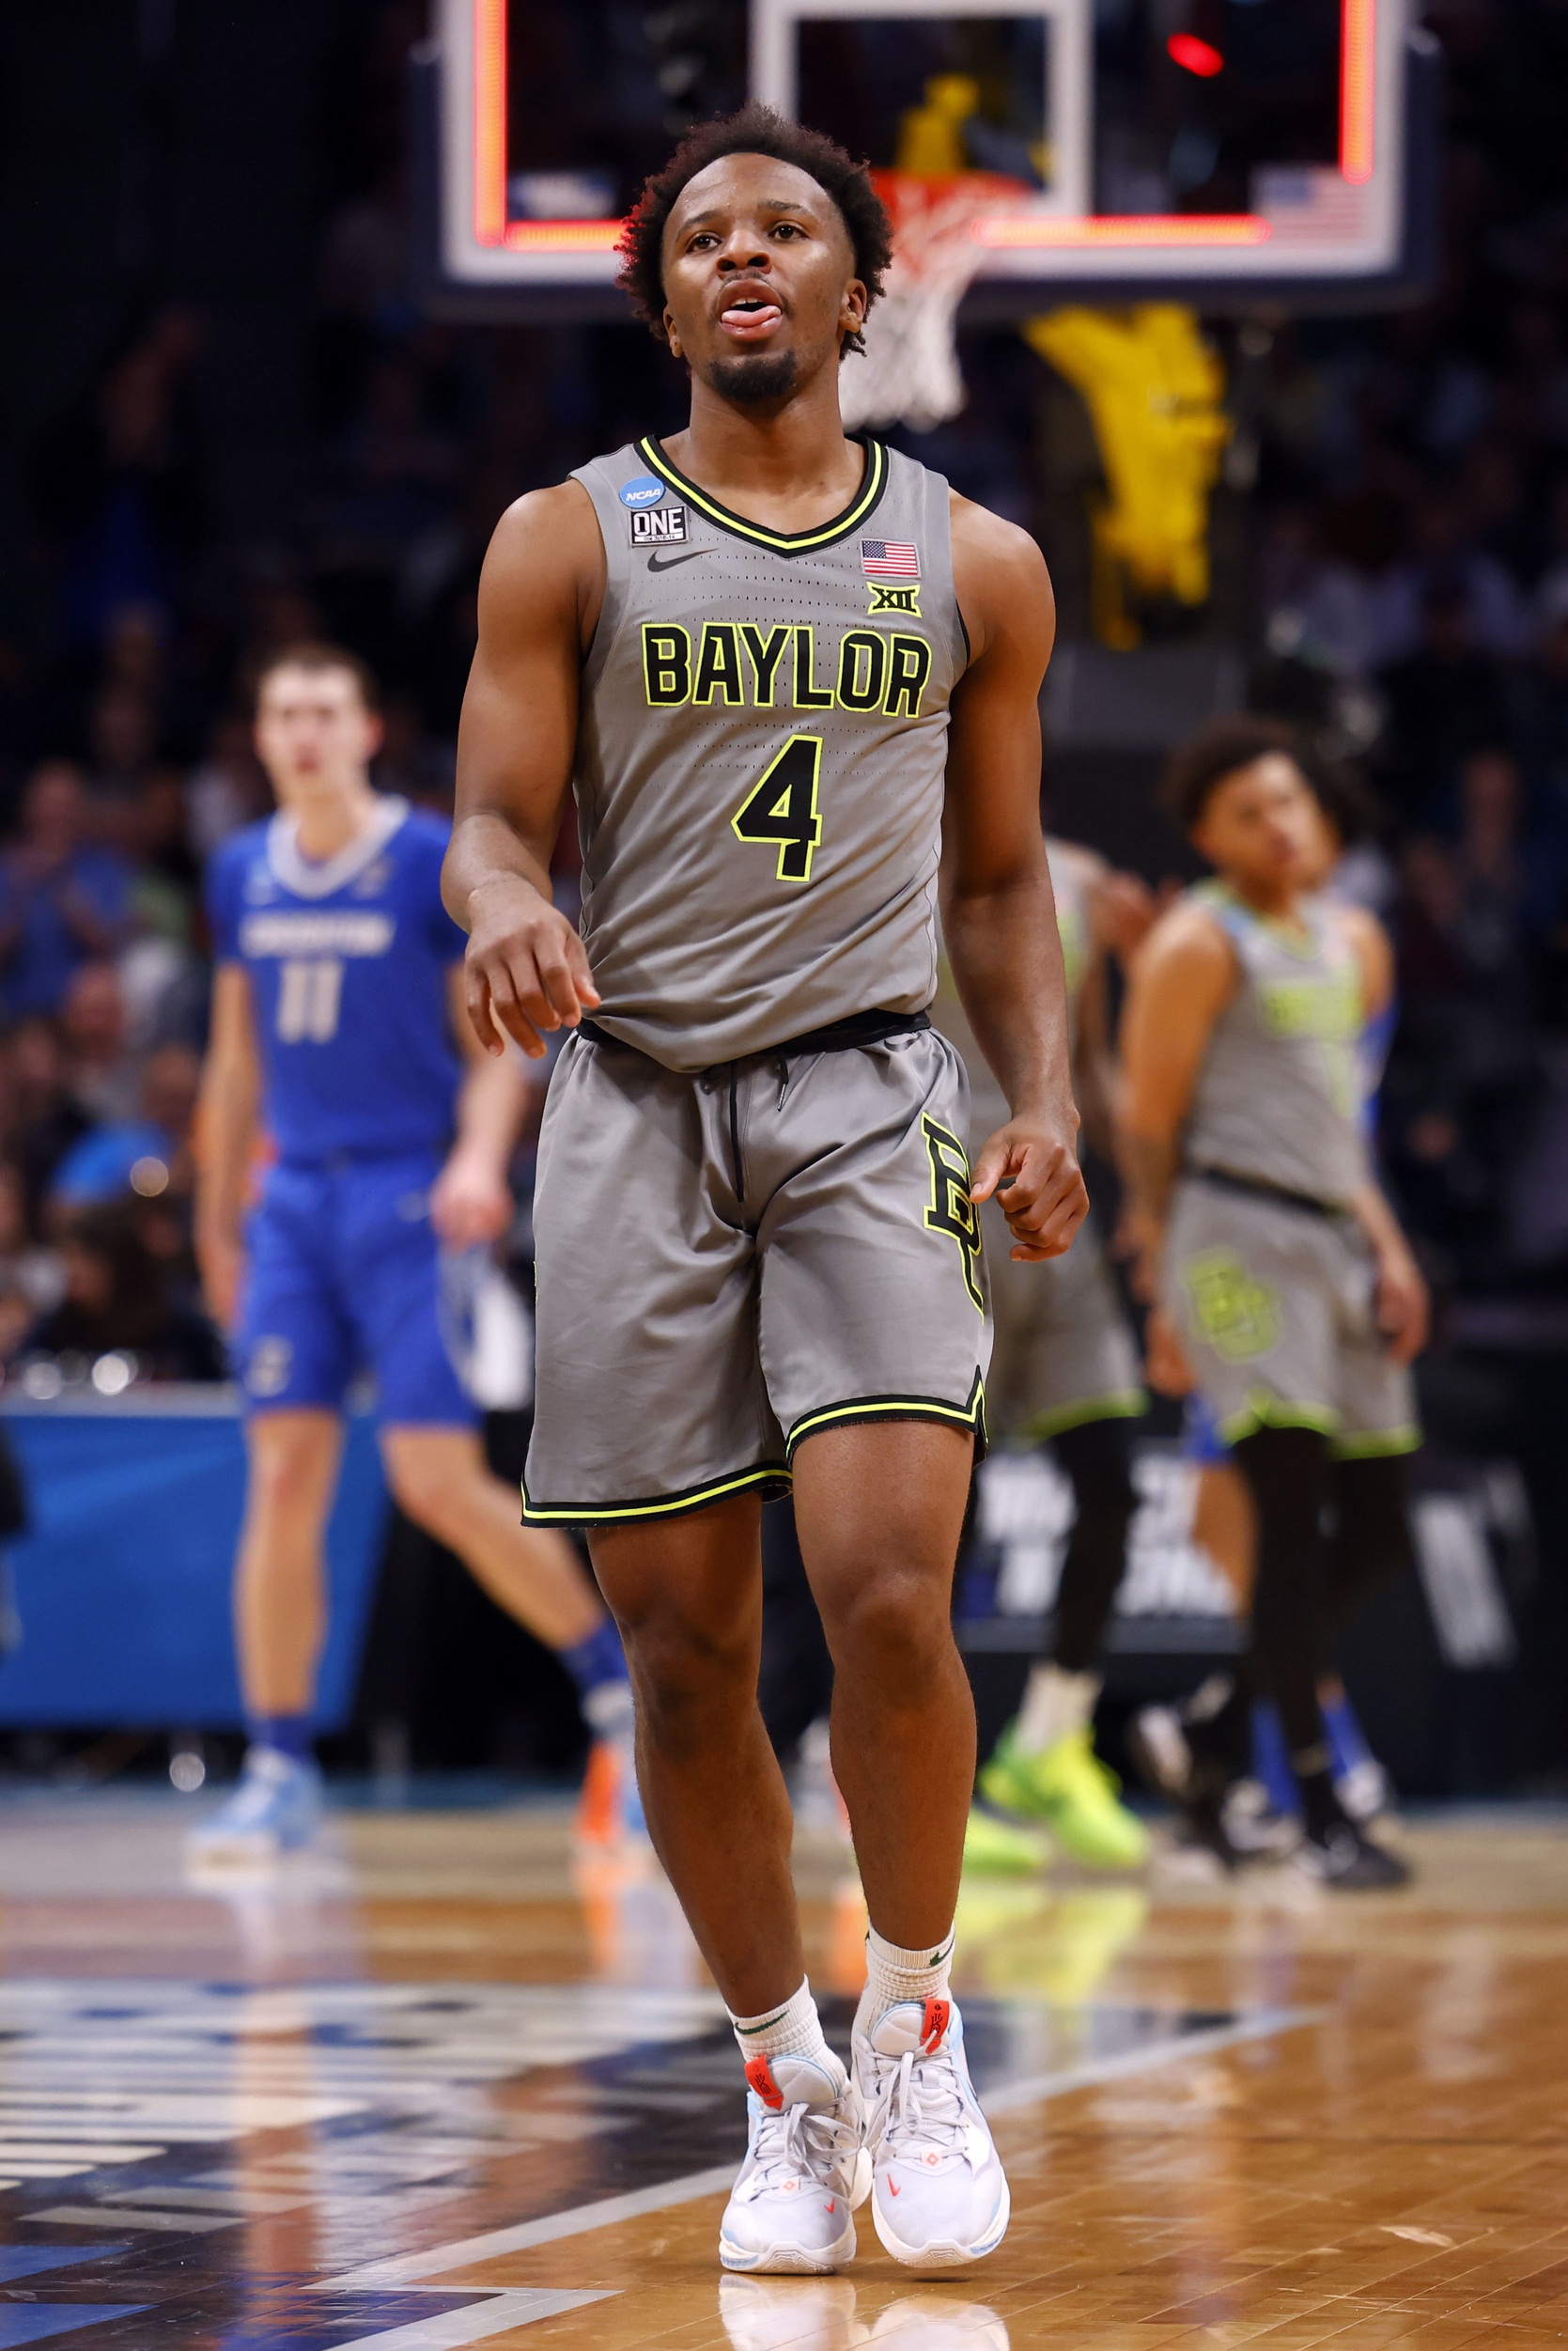 Mar 19, 2023; Denver, CO, USA; Baylor Bears guard LJ Cryer (4) reacts in the first half against the Creighton Bluejays at Ball Arena. Mandatory Credit: Michael Ciaglo-USA TODAY Sports